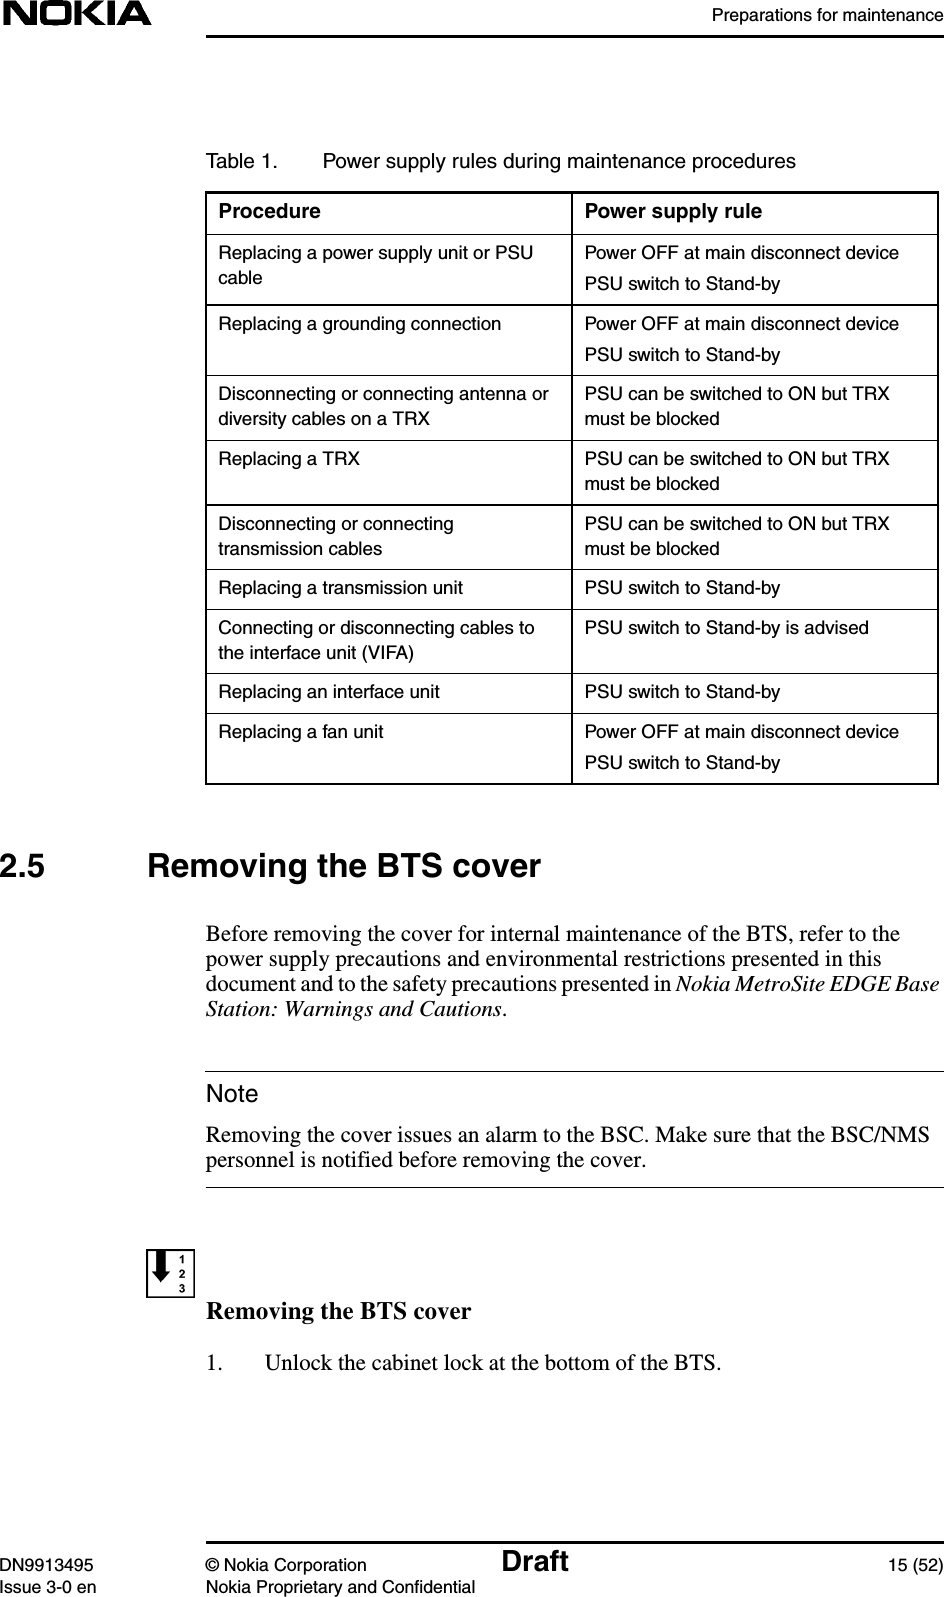 Preparations for maintenanceDN9913495 © Nokia Corporation Draft 15 (52)Issue 3-0 en Nokia Proprietary and ConfidentialNote2.5 Removing the BTS coverBefore removing the cover for internal maintenance of the BTS, refer to thepower supply precautions and environmental restrictions presented in thisdocument and to the safety precautions presented in Nokia MetroSite EDGE BaseStation: Warnings and Cautions.Removing the cover issues an alarm to the BSC. Make sure that the BSC/NMSpersonnel is notified before removing the cover.Removing the BTS cover1. Unlock the cabinet lock at the bottom of the BTS.Table 1. Power supply rules during maintenance proceduresProcedure Power supply ruleReplacing a power supply unit or PSUcablePower OFF at main disconnect devicePSU switch to Stand-byReplacing a grounding connection Power OFF at main disconnect devicePSU switch to Stand-byDisconnecting or connecting antenna ordiversity cables on a TRXPSU can be switched to ON but TRXmust be blockedReplacing a TRX PSU can be switched to ON but TRXmust be blockedDisconnecting or connectingtransmission cablesPSU can be switched to ON but TRXmust be blockedReplacing a transmission unit PSU switch to Stand-byConnecting or disconnecting cables tothe interface unit (VIFA)PSU switch to Stand-by is advisedReplacing an interface unit PSU switch to Stand-byReplacing a fan unit Power OFF at main disconnect devicePSU switch to Stand-by